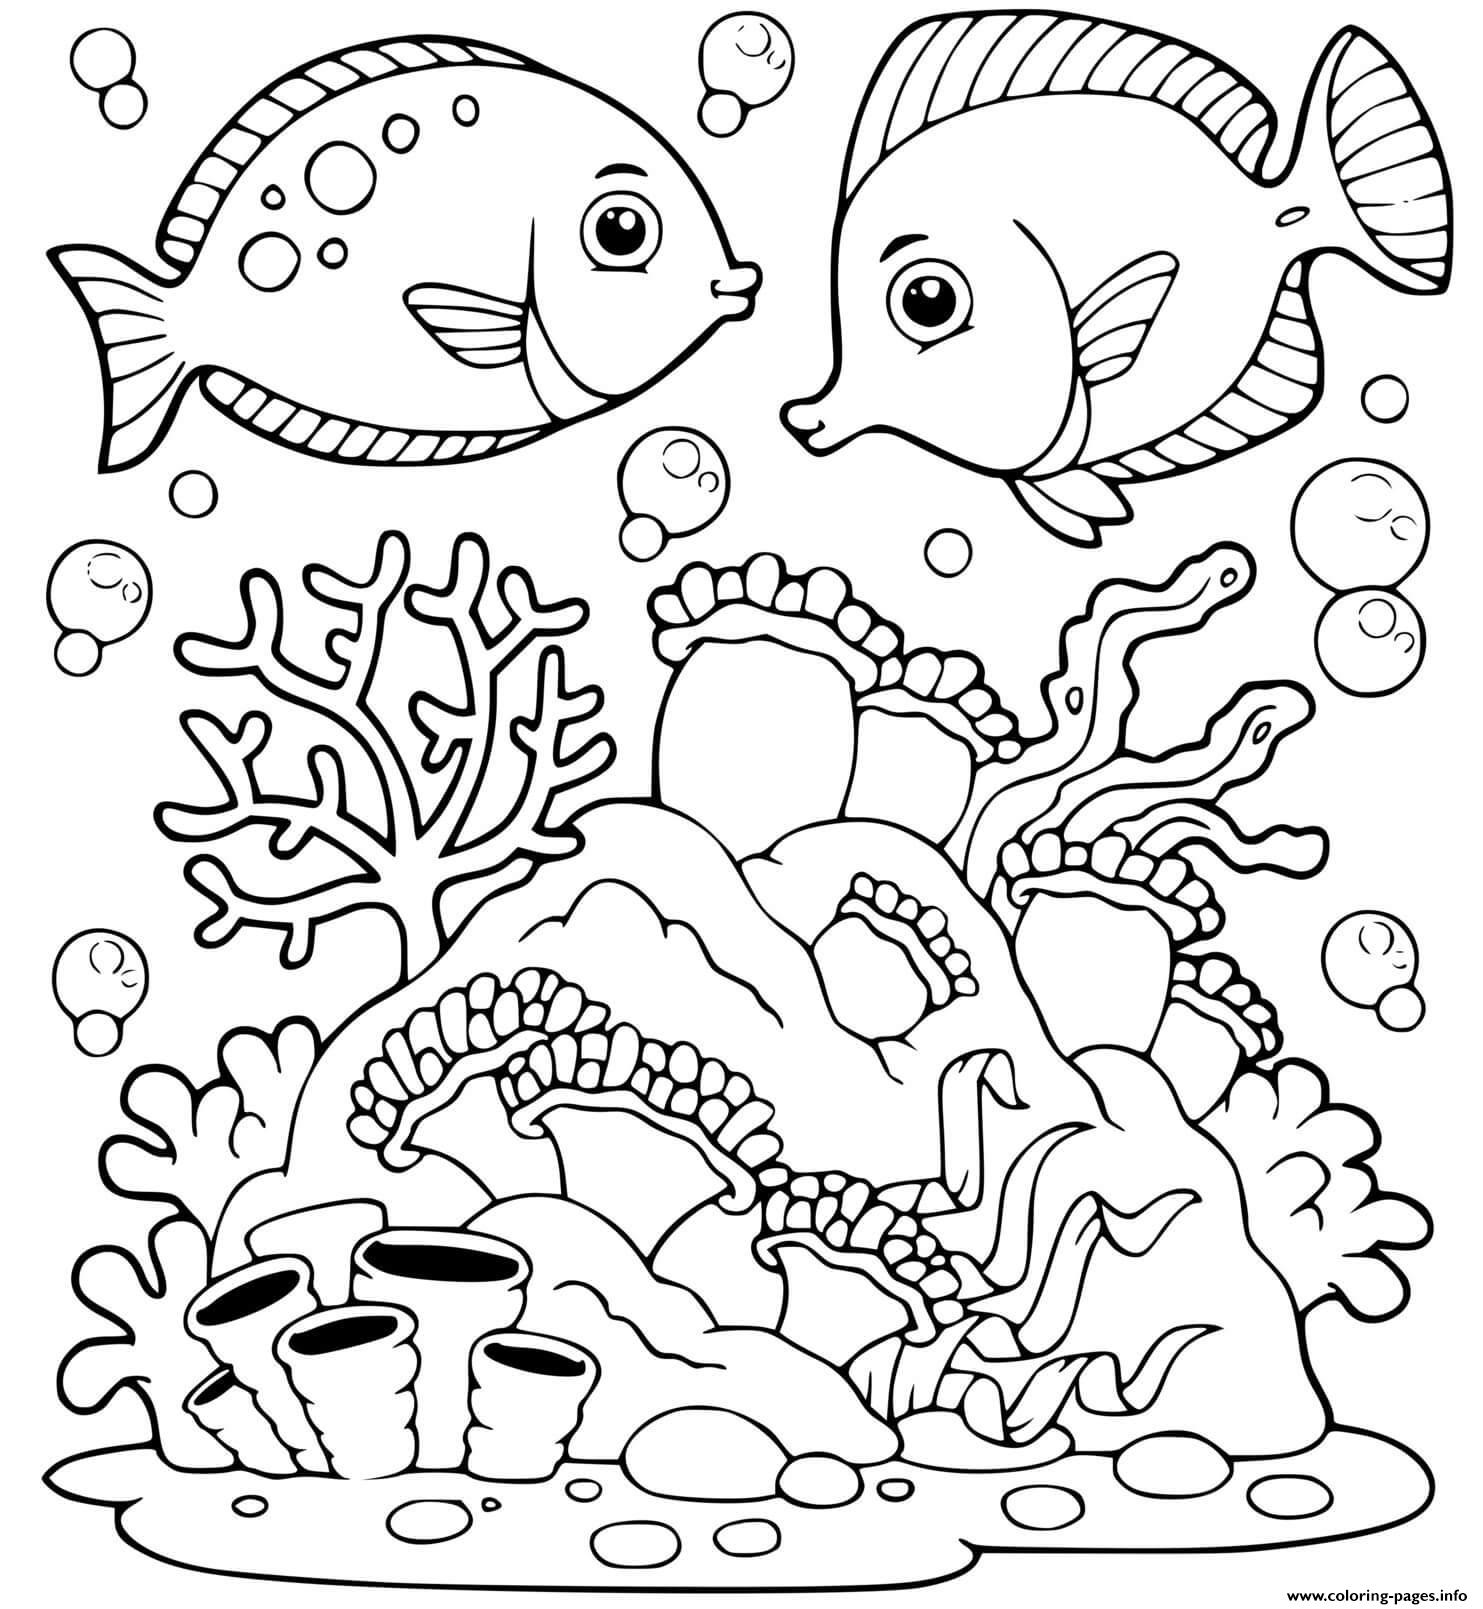 Breakthrough Indirect TV set sea animals coloring pages to print ...